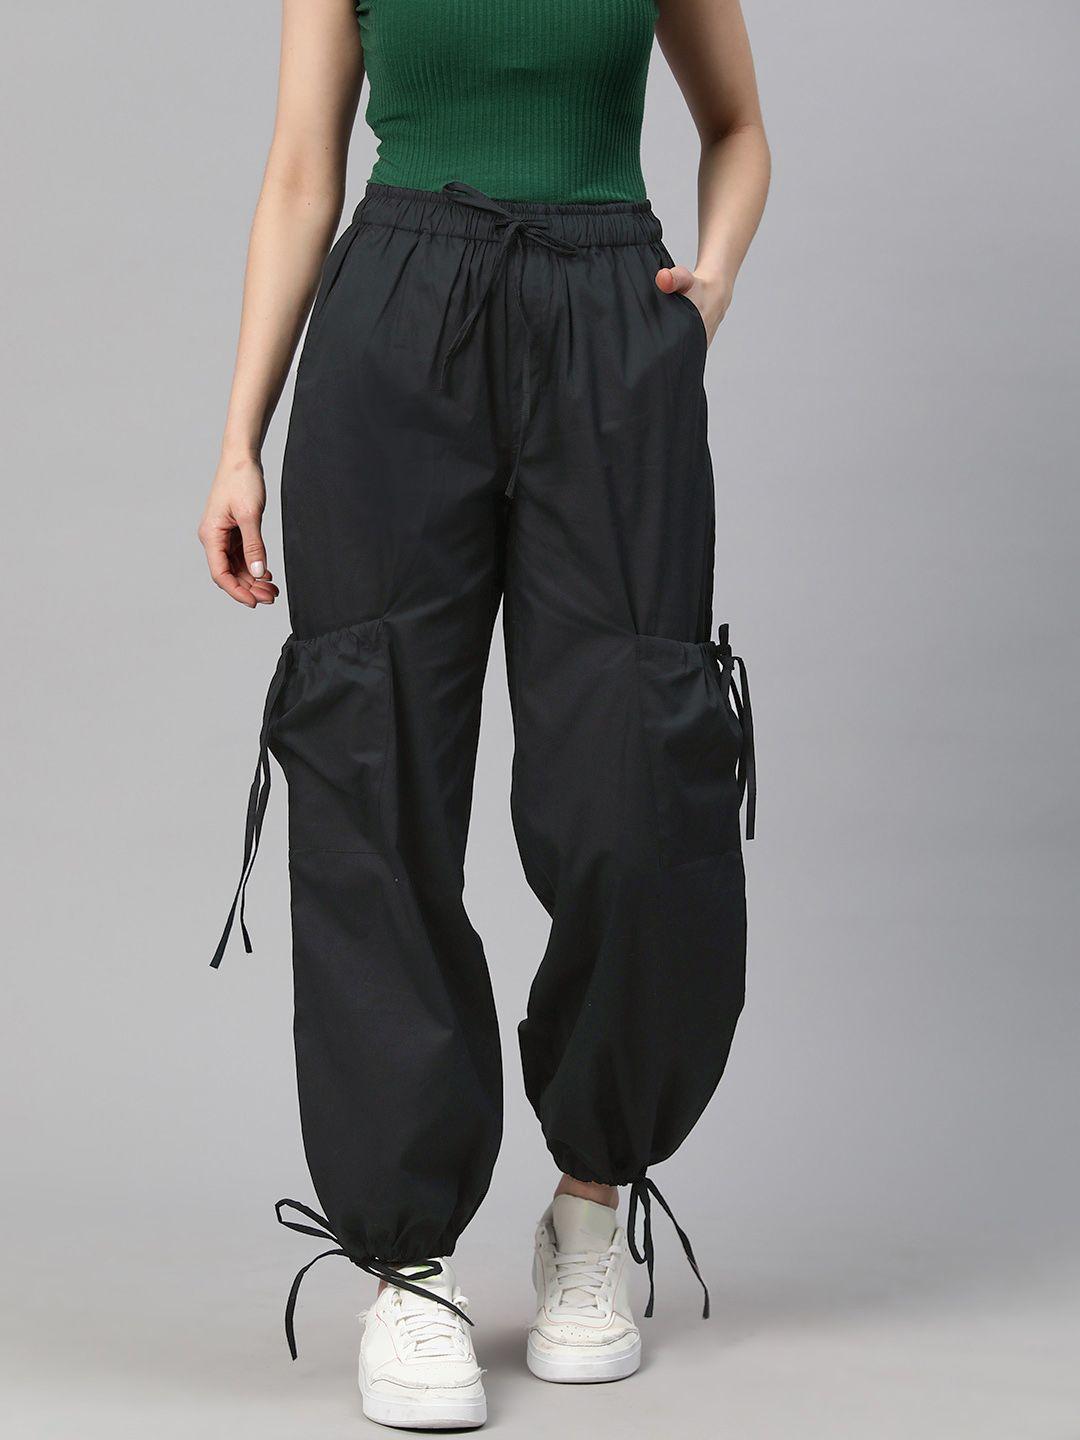 popnetic-loose-fit-high-rise-pure-cotton-parachute-cargos-trousers